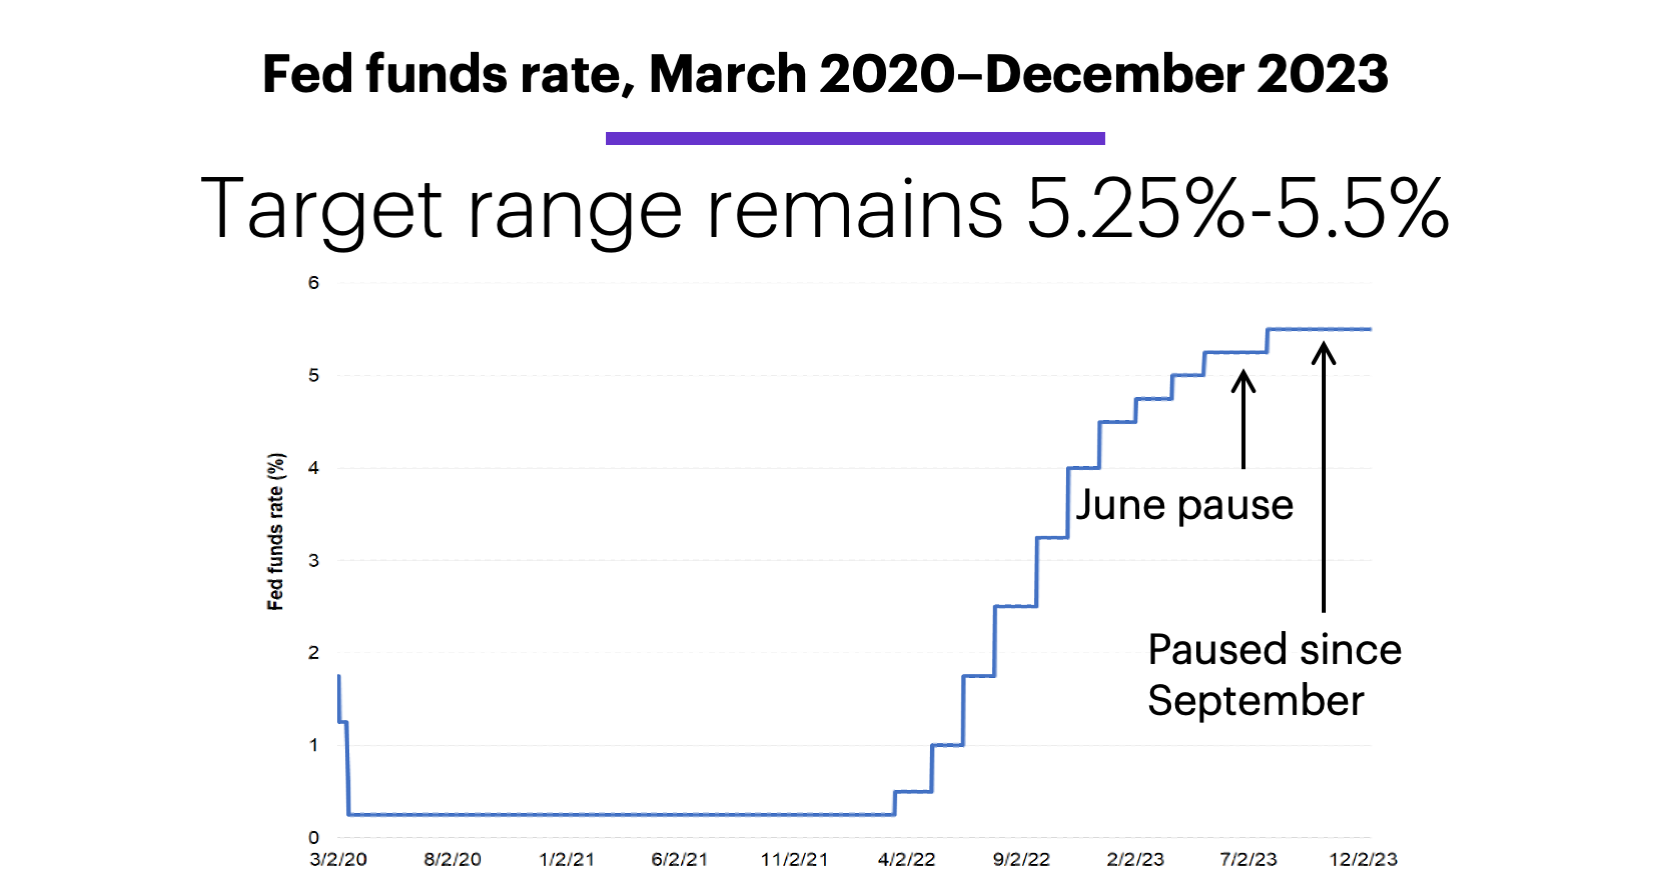 Chart 1: Fed funds rate, March 2020–December 2023. Target range remains 5.25%-5.5%.